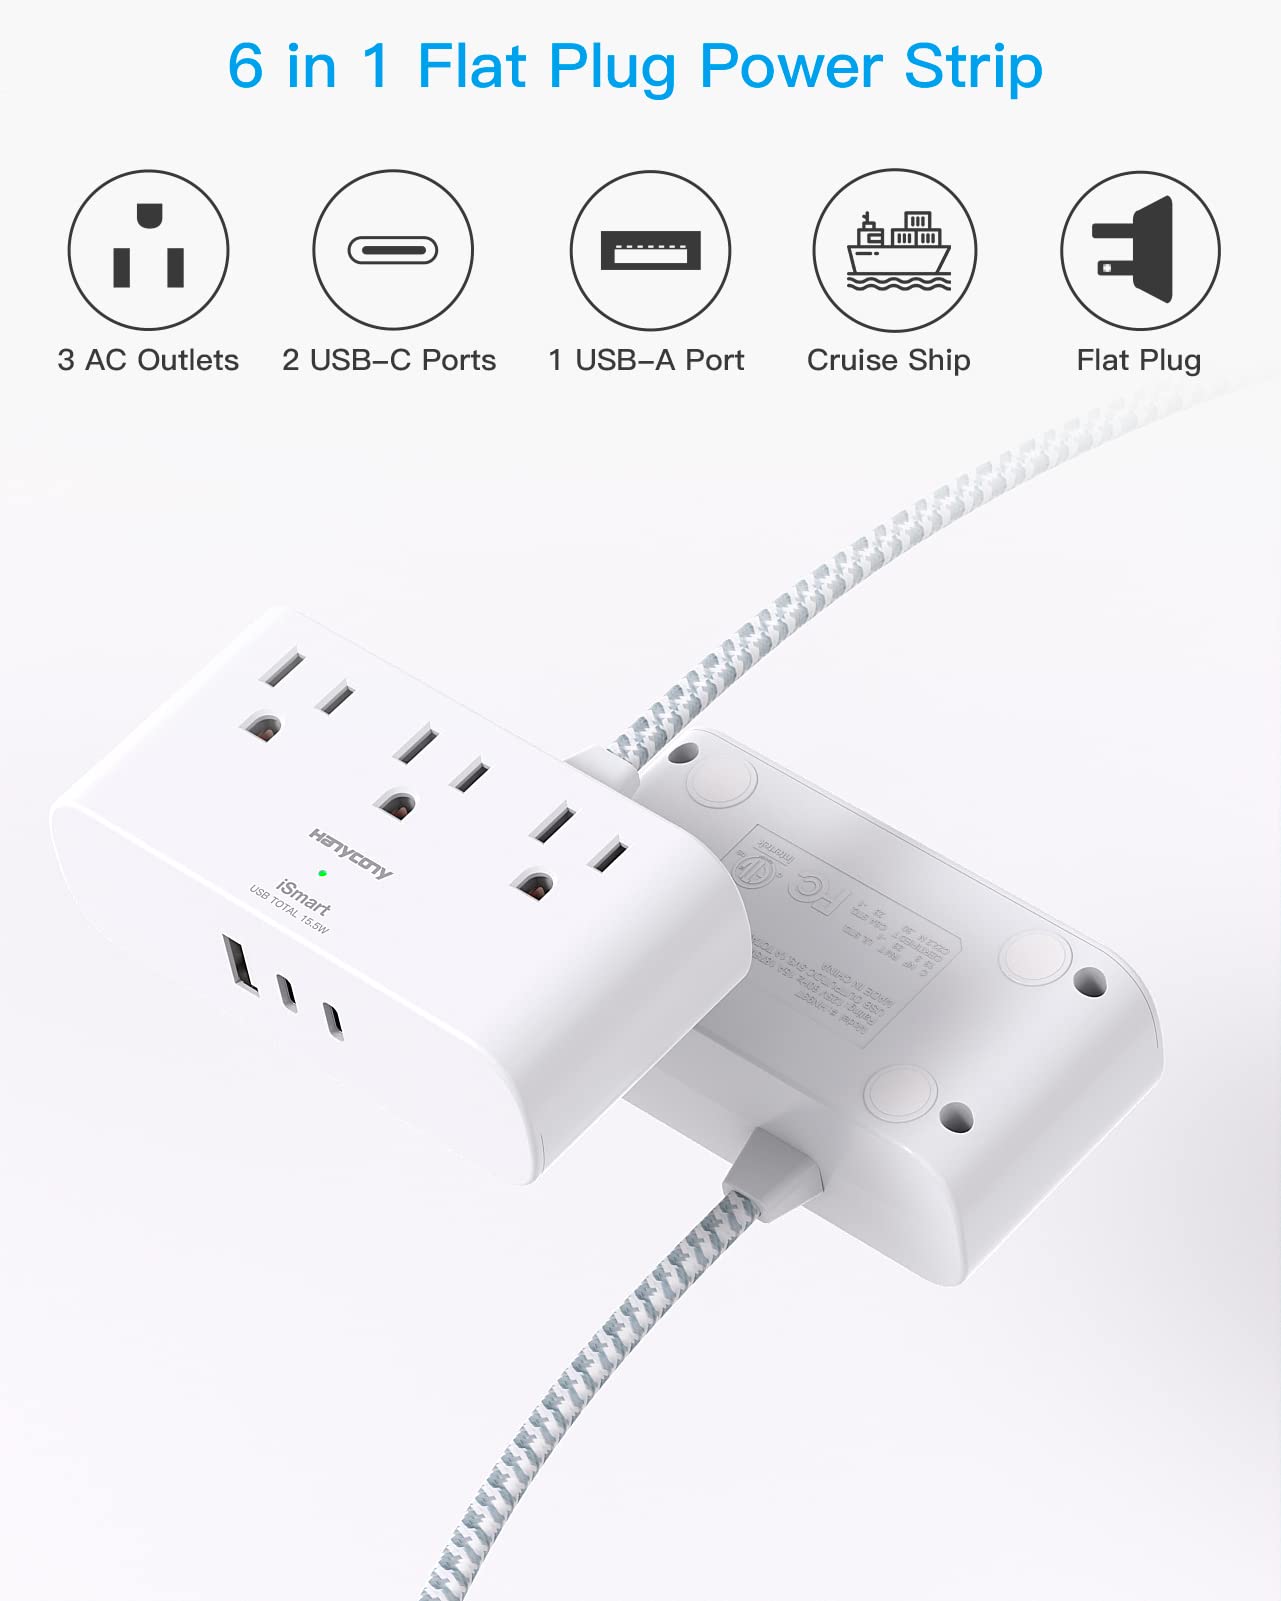 10Ft Surge Protector Power Strip and 6Ft Ultra Thin Flat Plug Power Strip